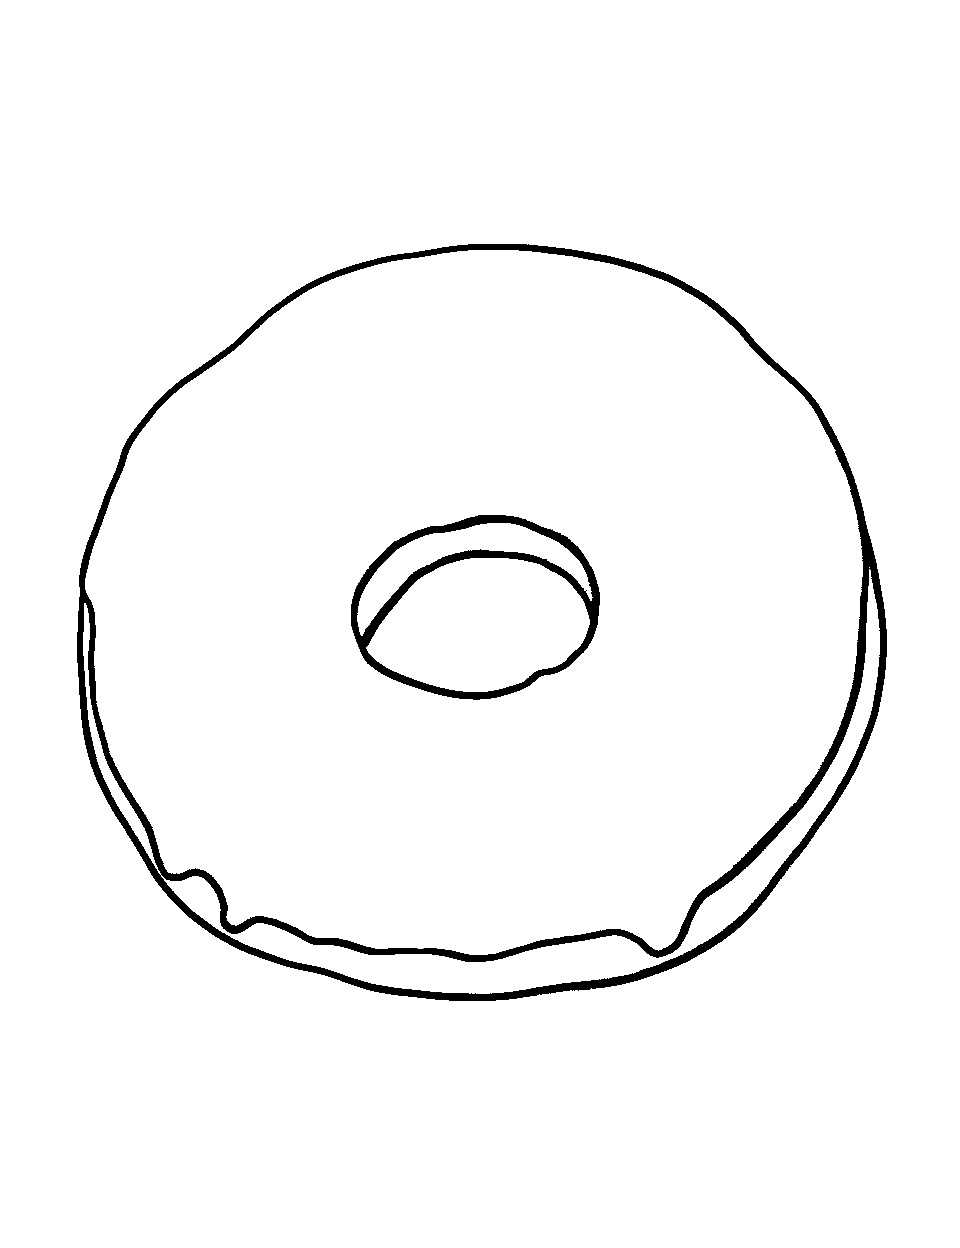 Donut coloring pages free printable sheets